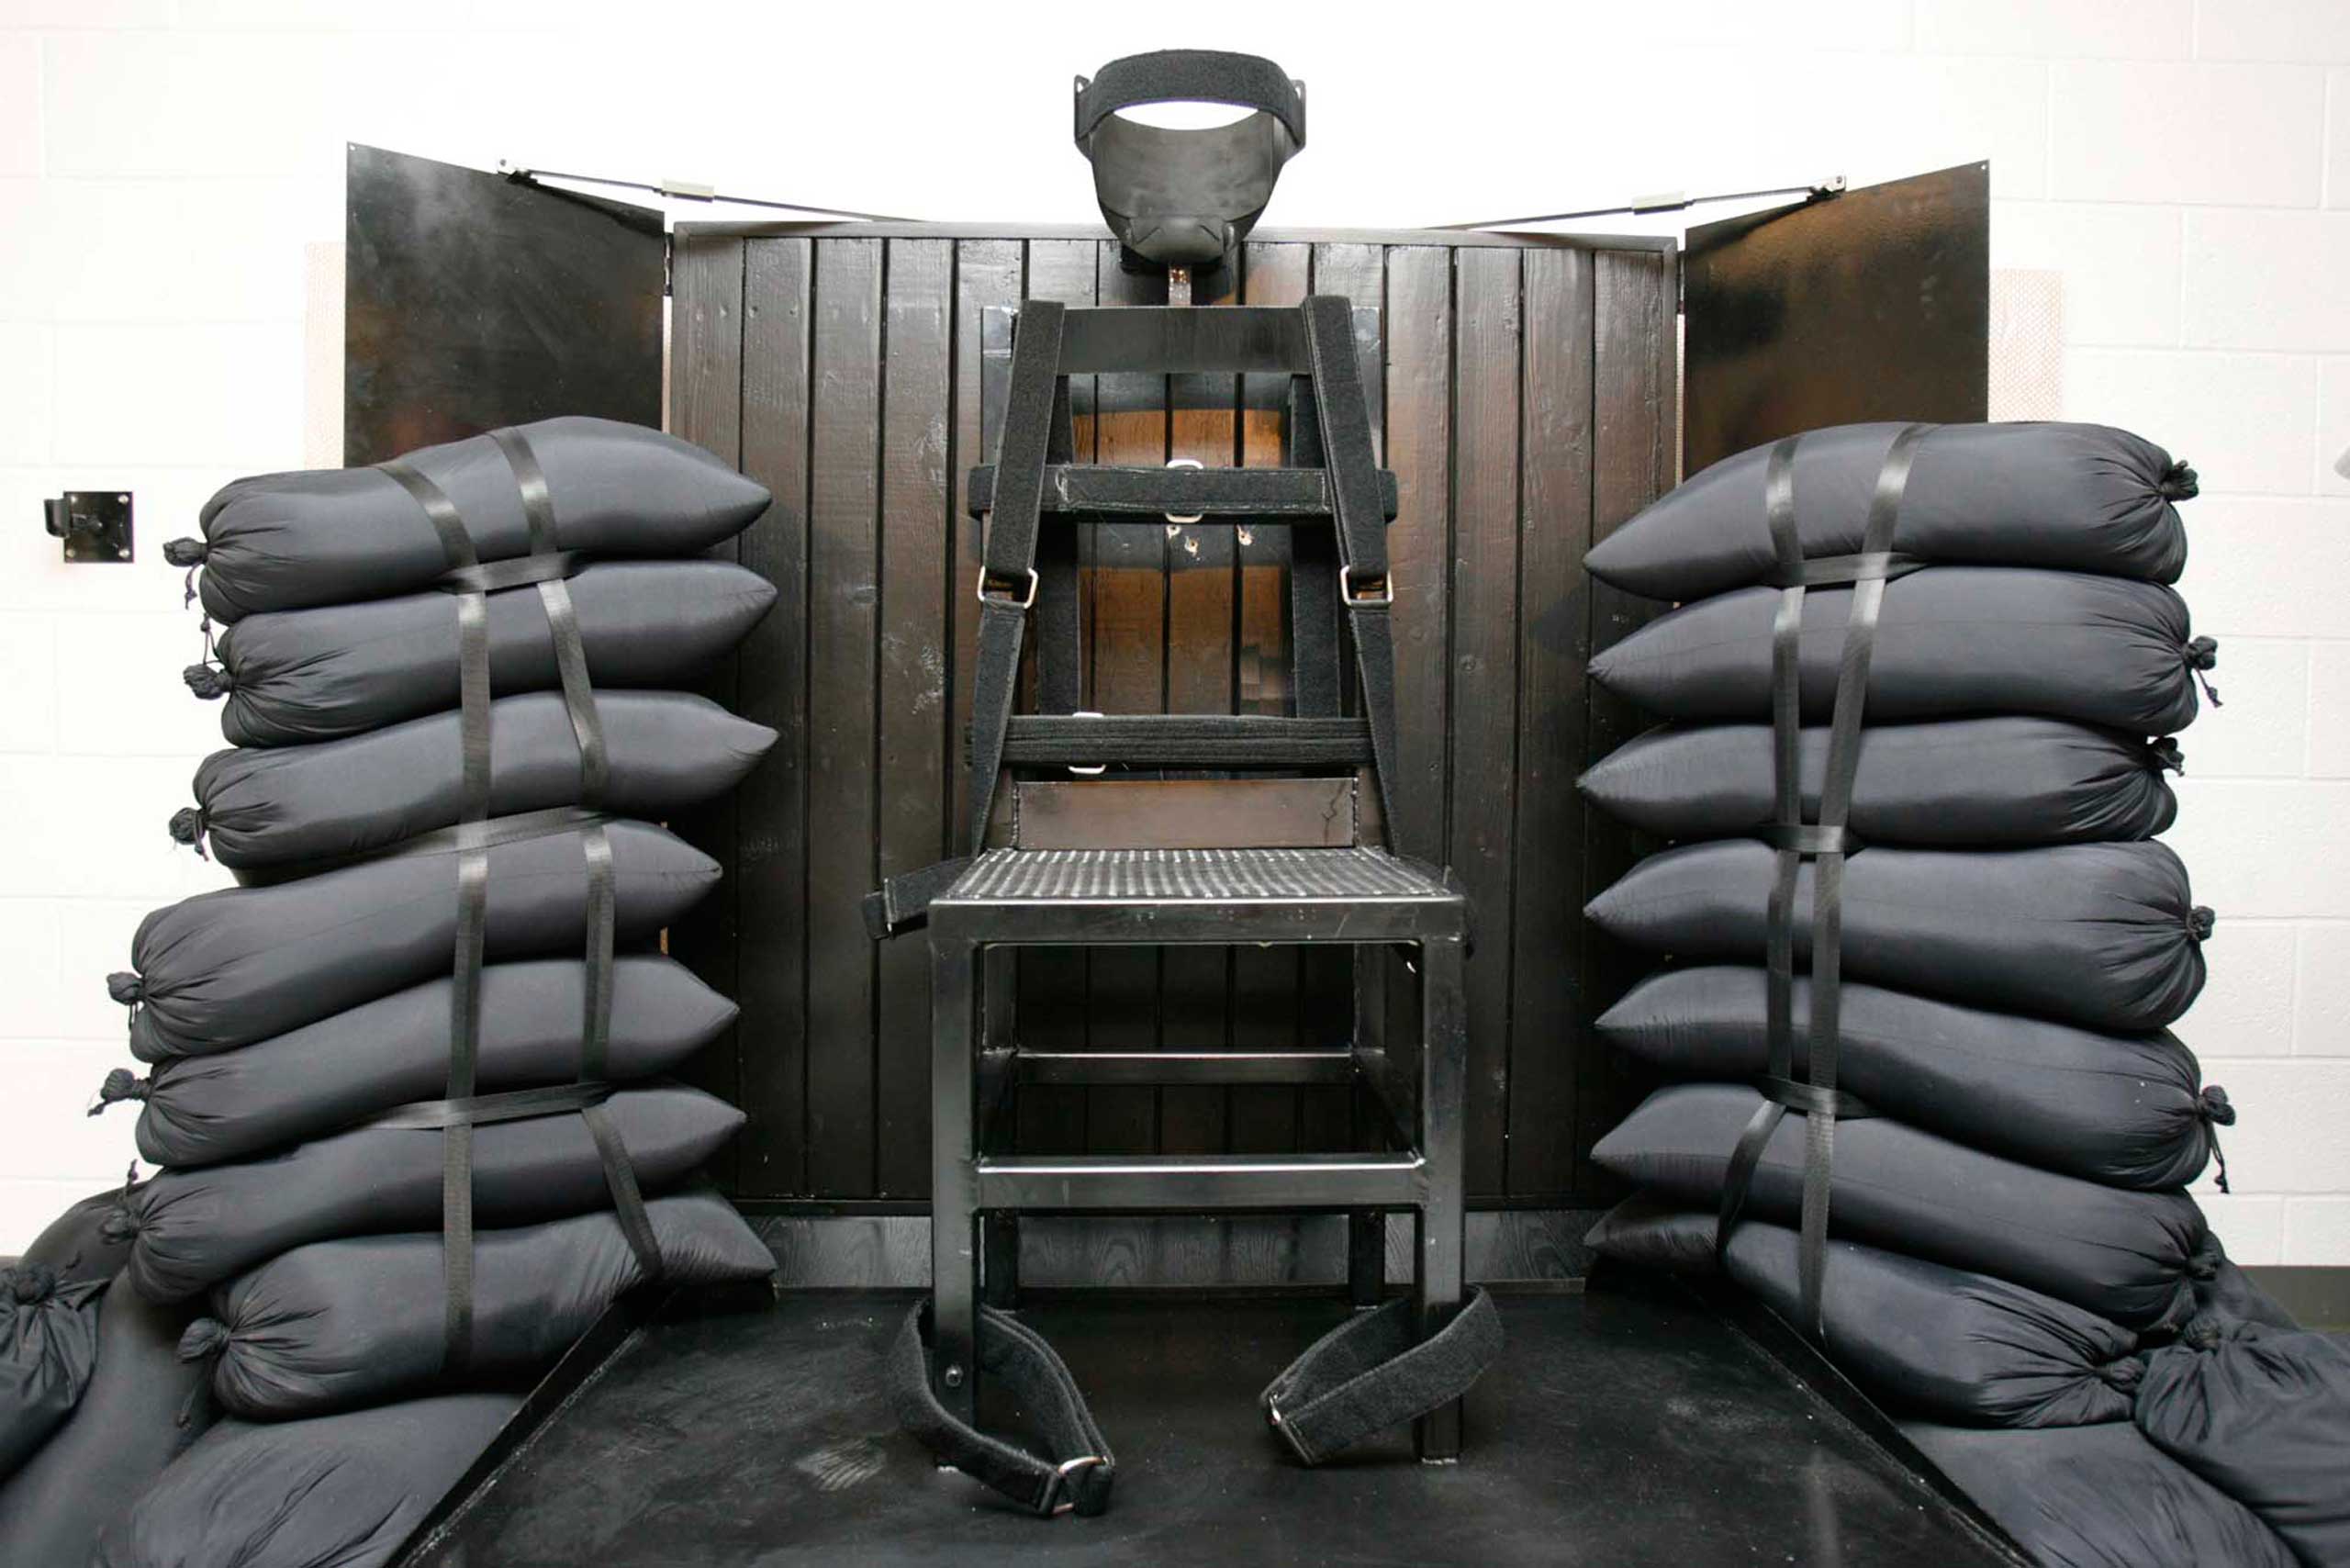 The firing squad execution chamber at the Utah State Prison in Draper, Utah in 2010.